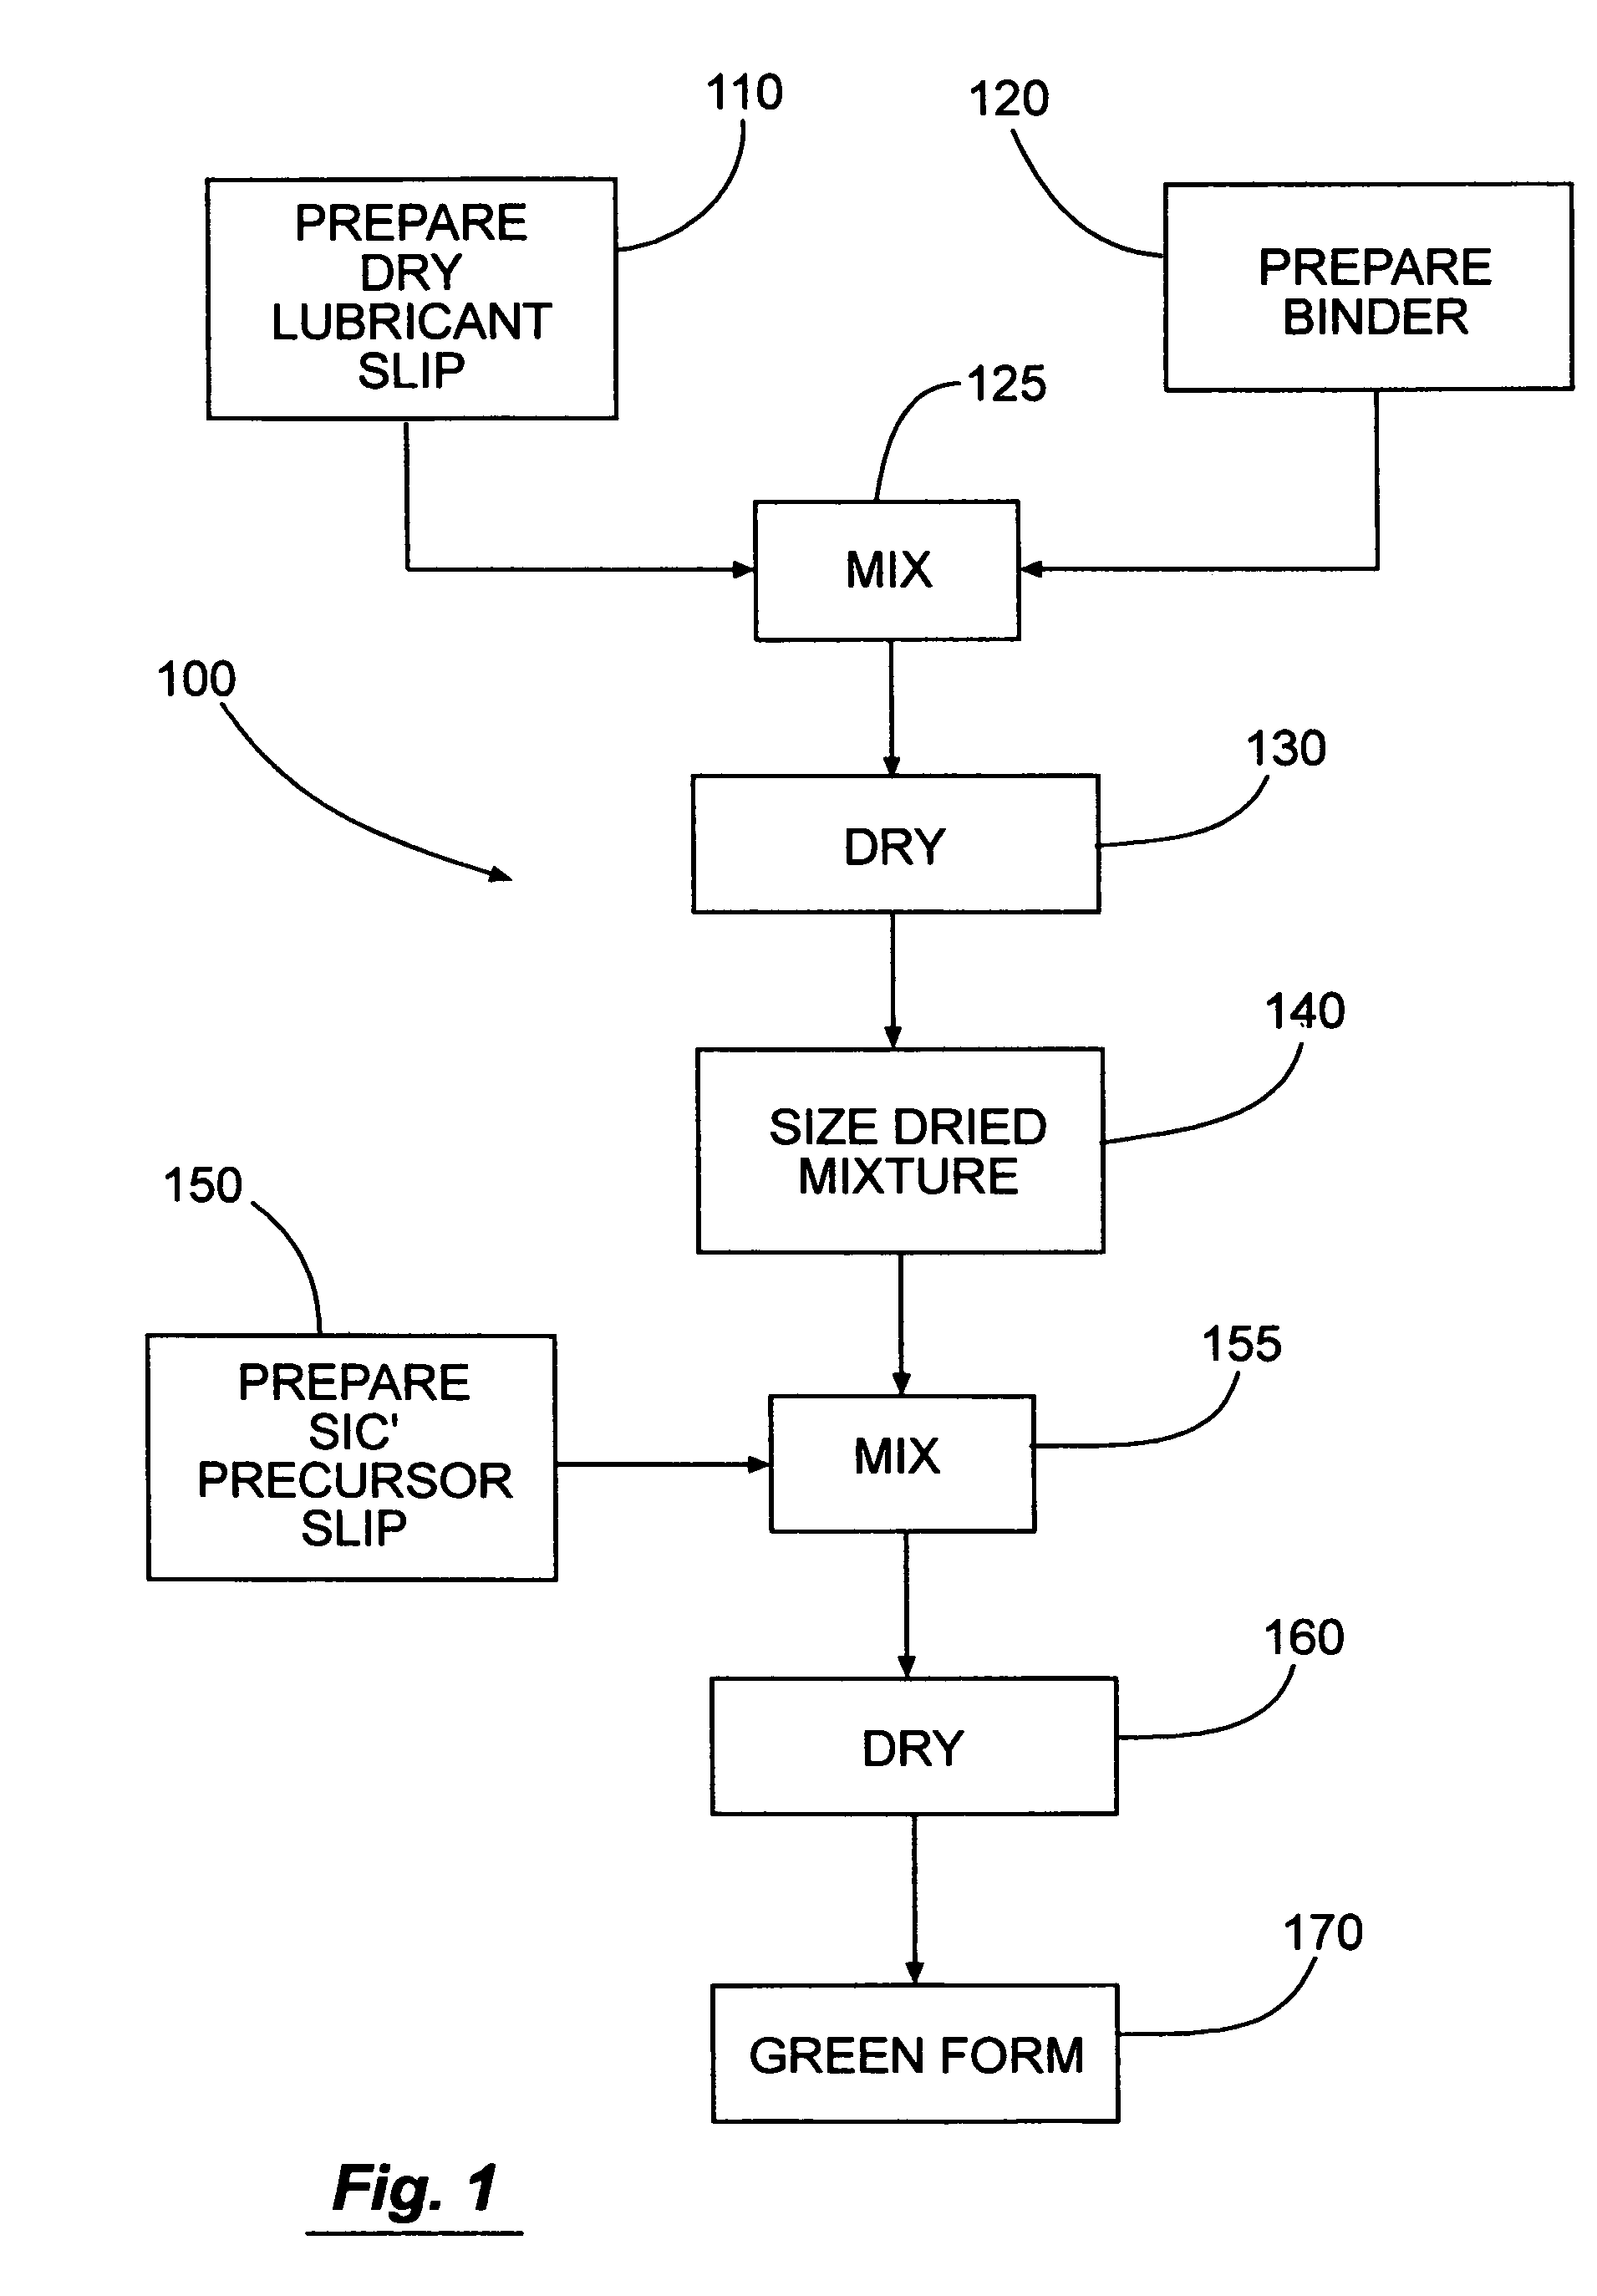 Graphite loaded silicon carbide and methods for making